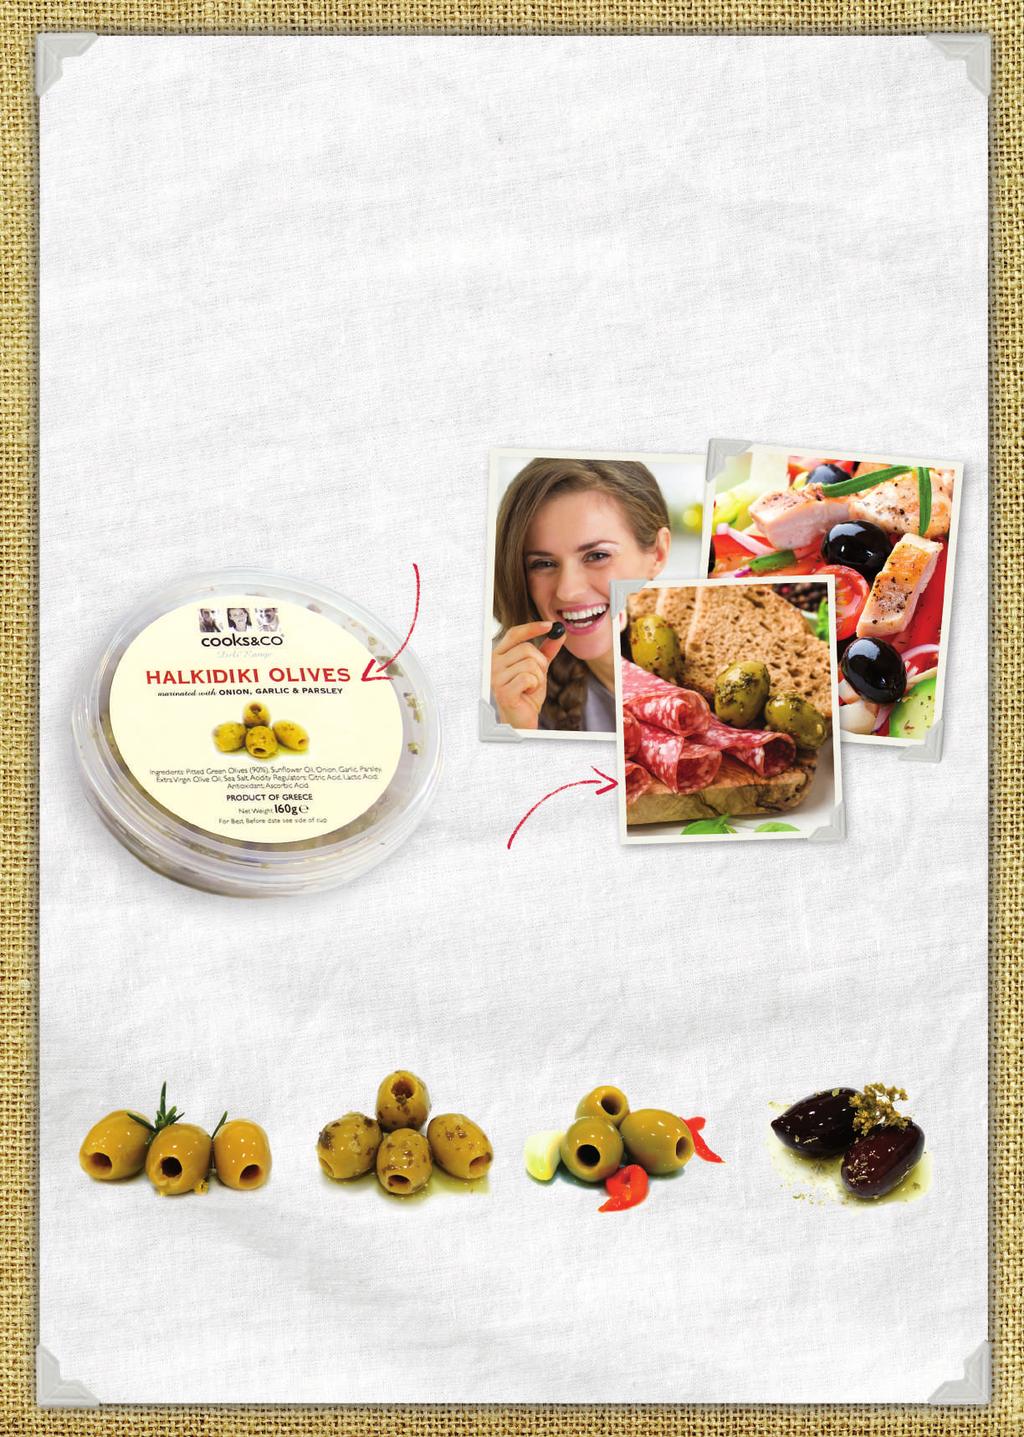 Ambient olive shoppers want new taste experiences and more snacking options* Deli Pots are the solution!